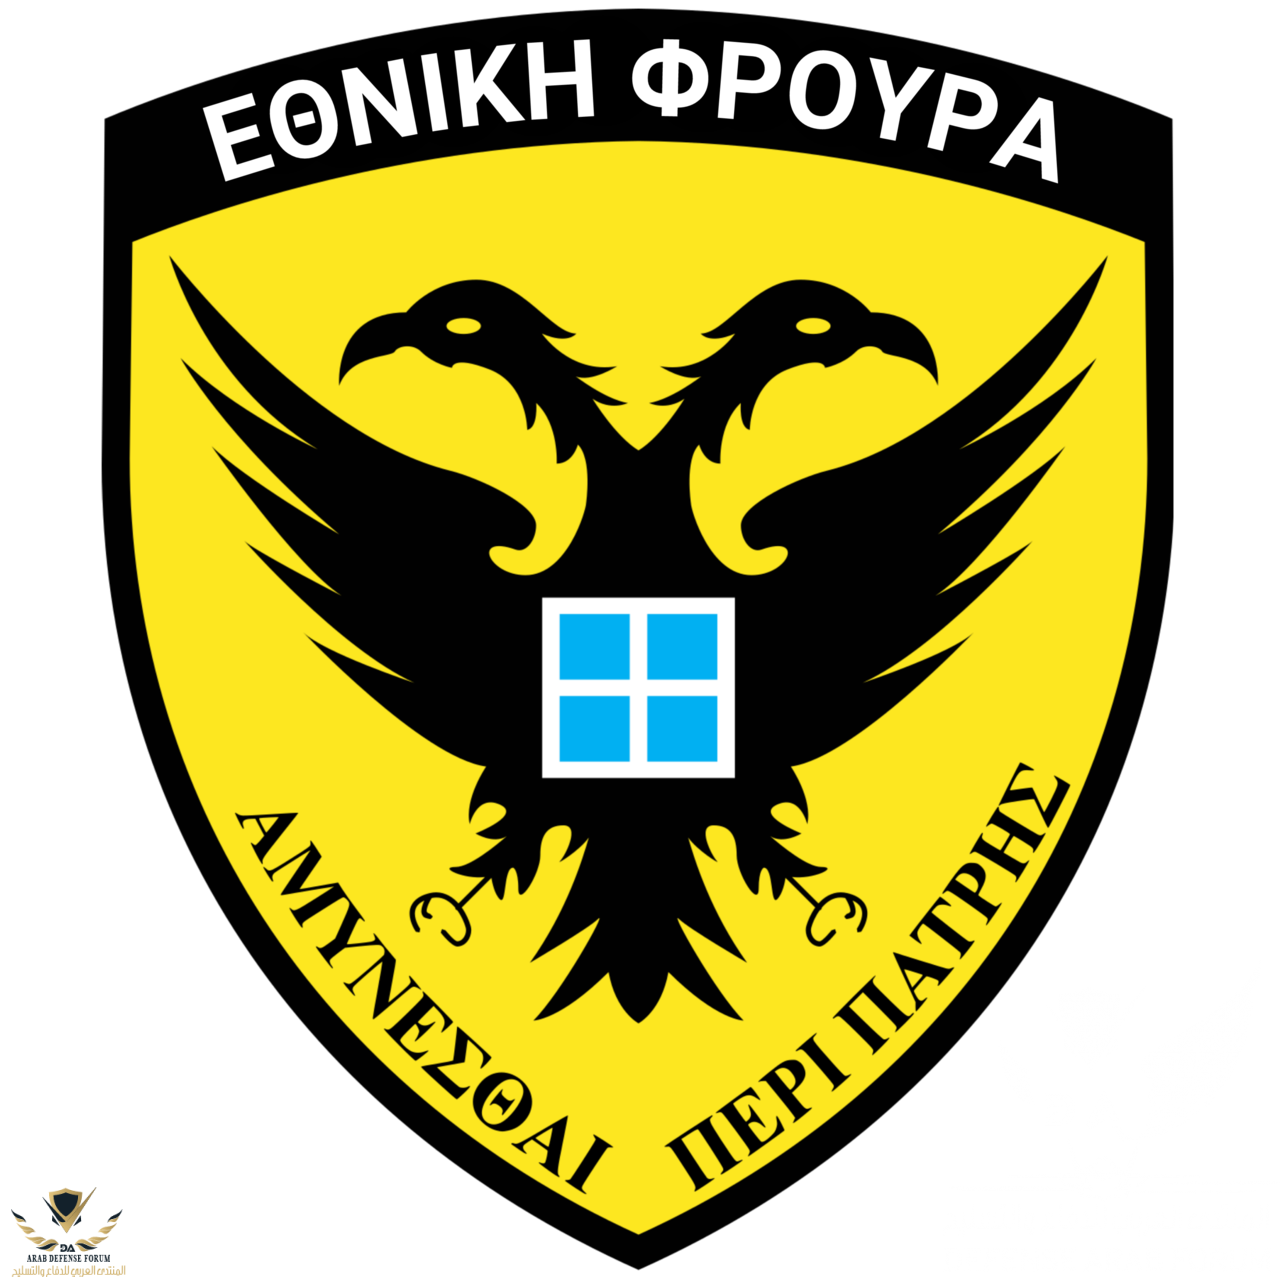 1280px-Emblem_of_the_Cypriot_National_Guard.png